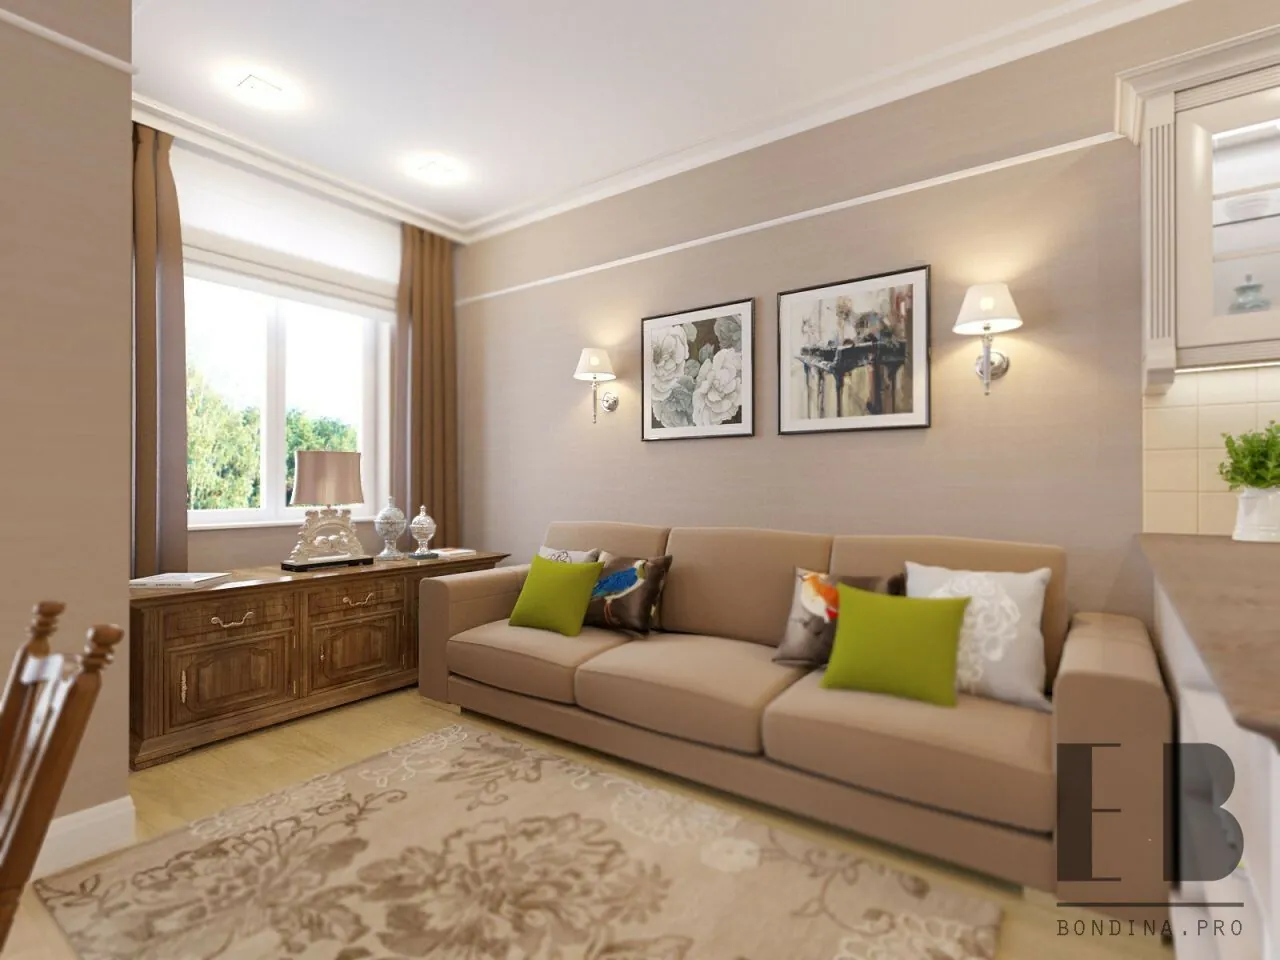 Small Living Room in Beige Color with Beige Sofa and wooden low chest of drawers